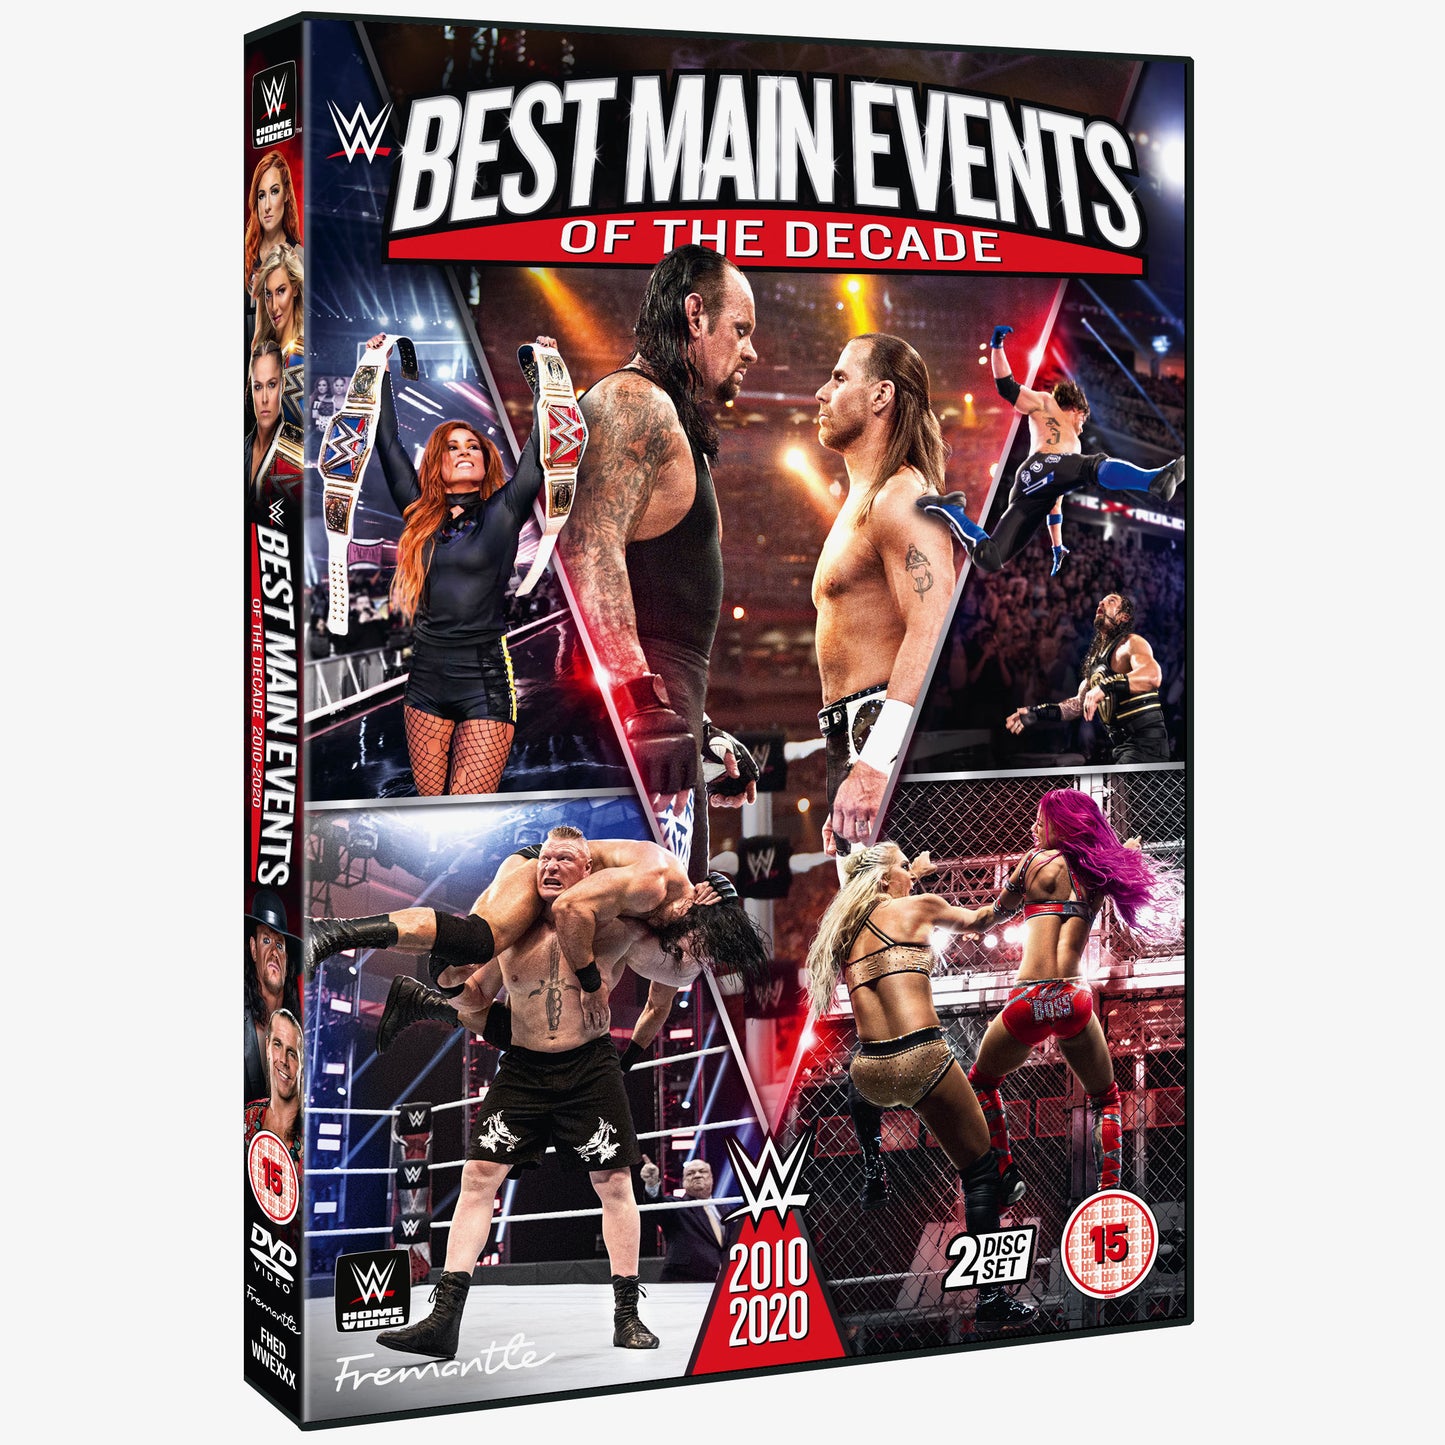 WWE Best Main Events of the Decade 2010-2020 DVD